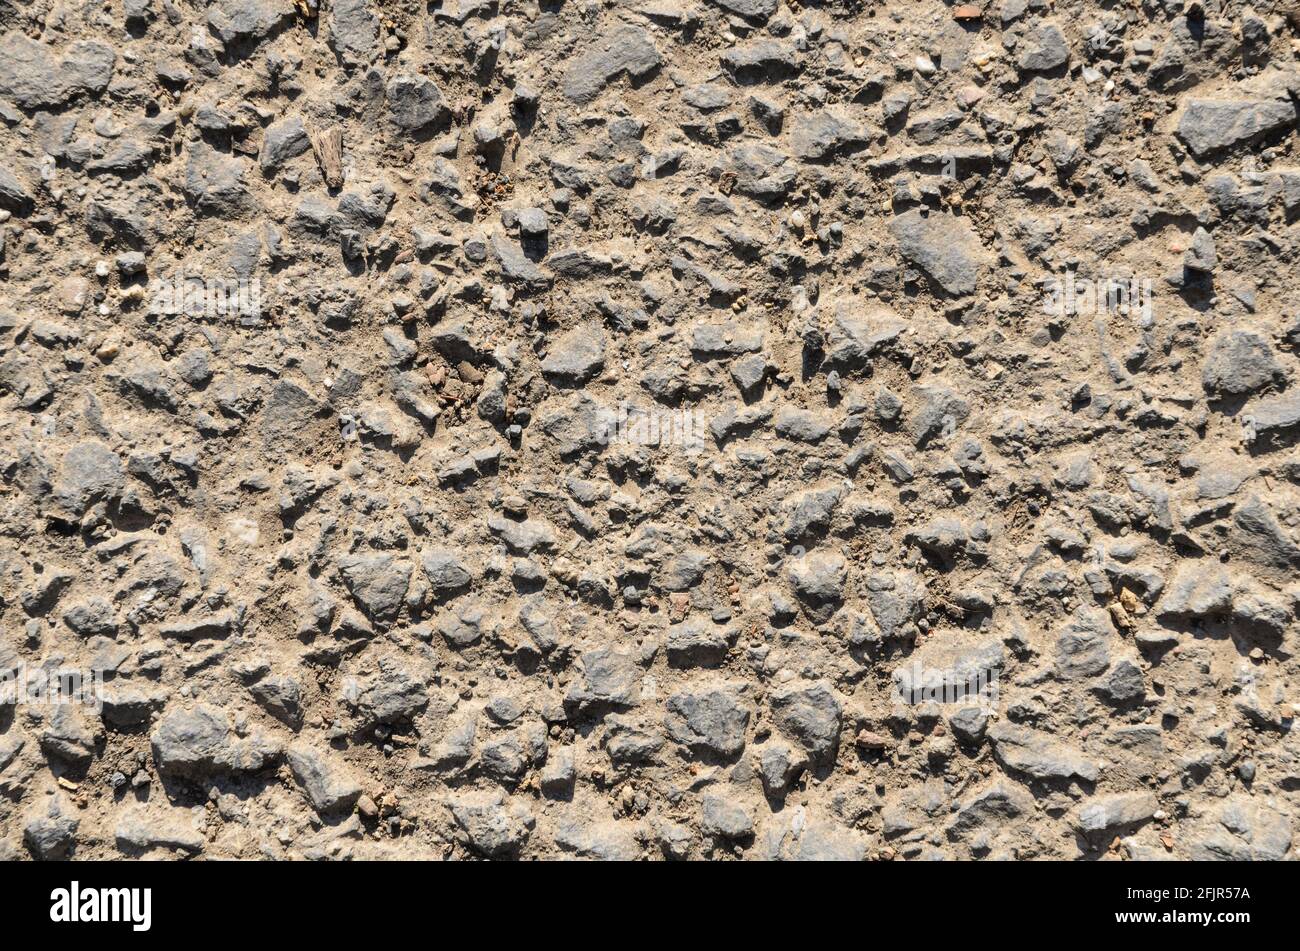 Pavement gravel, grey stone ground and hard surface flat lay view from directly above, abstract background or wallpaper Stock Photo